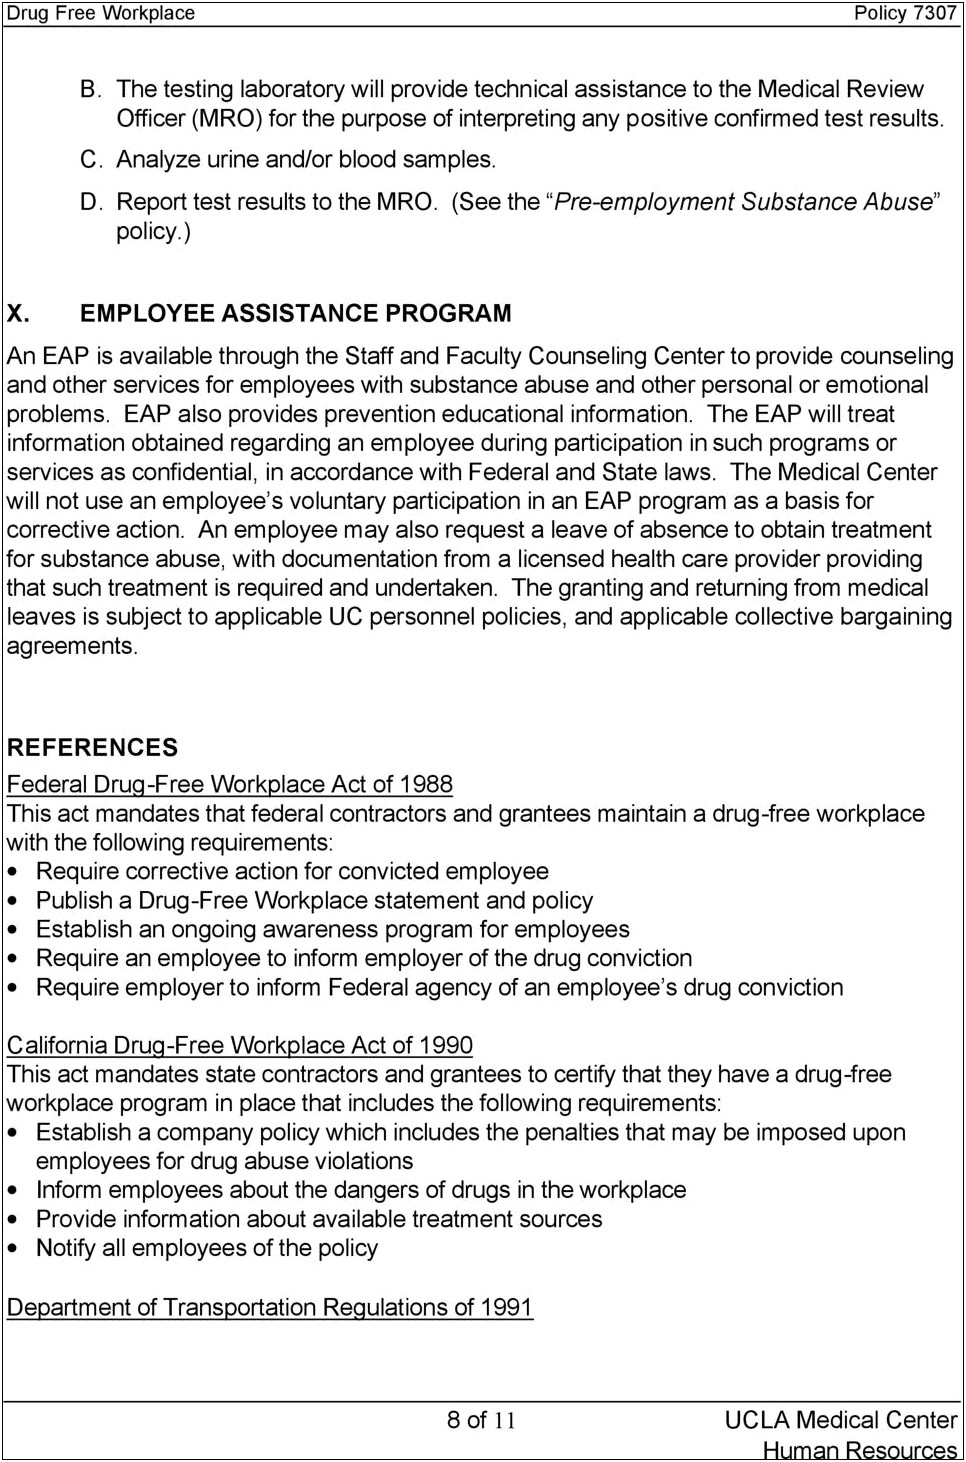 Drug And Alcohol Free Workplace Policy Template Templates : Resume